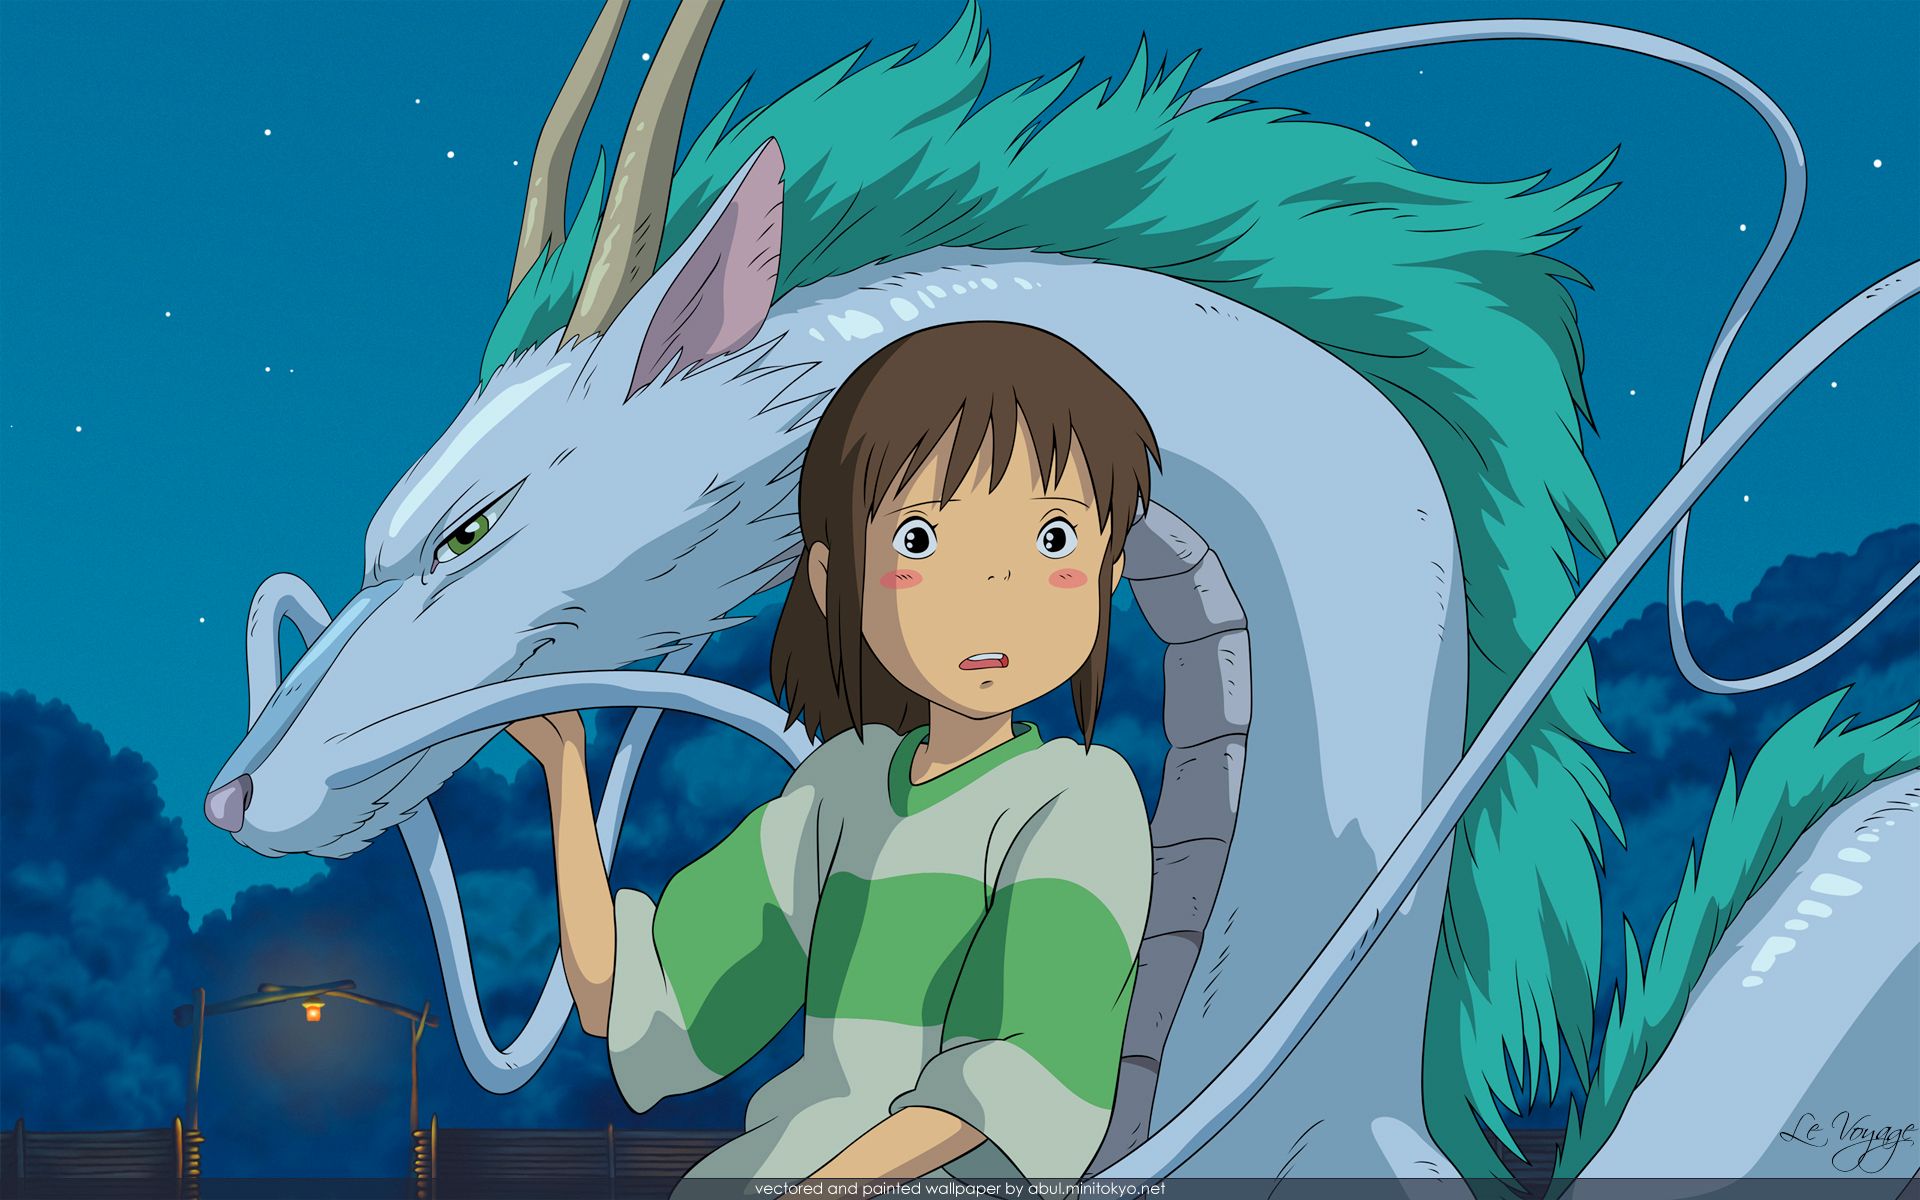 8 MyersBriggs® Personality Types Of Spirited Away Characters